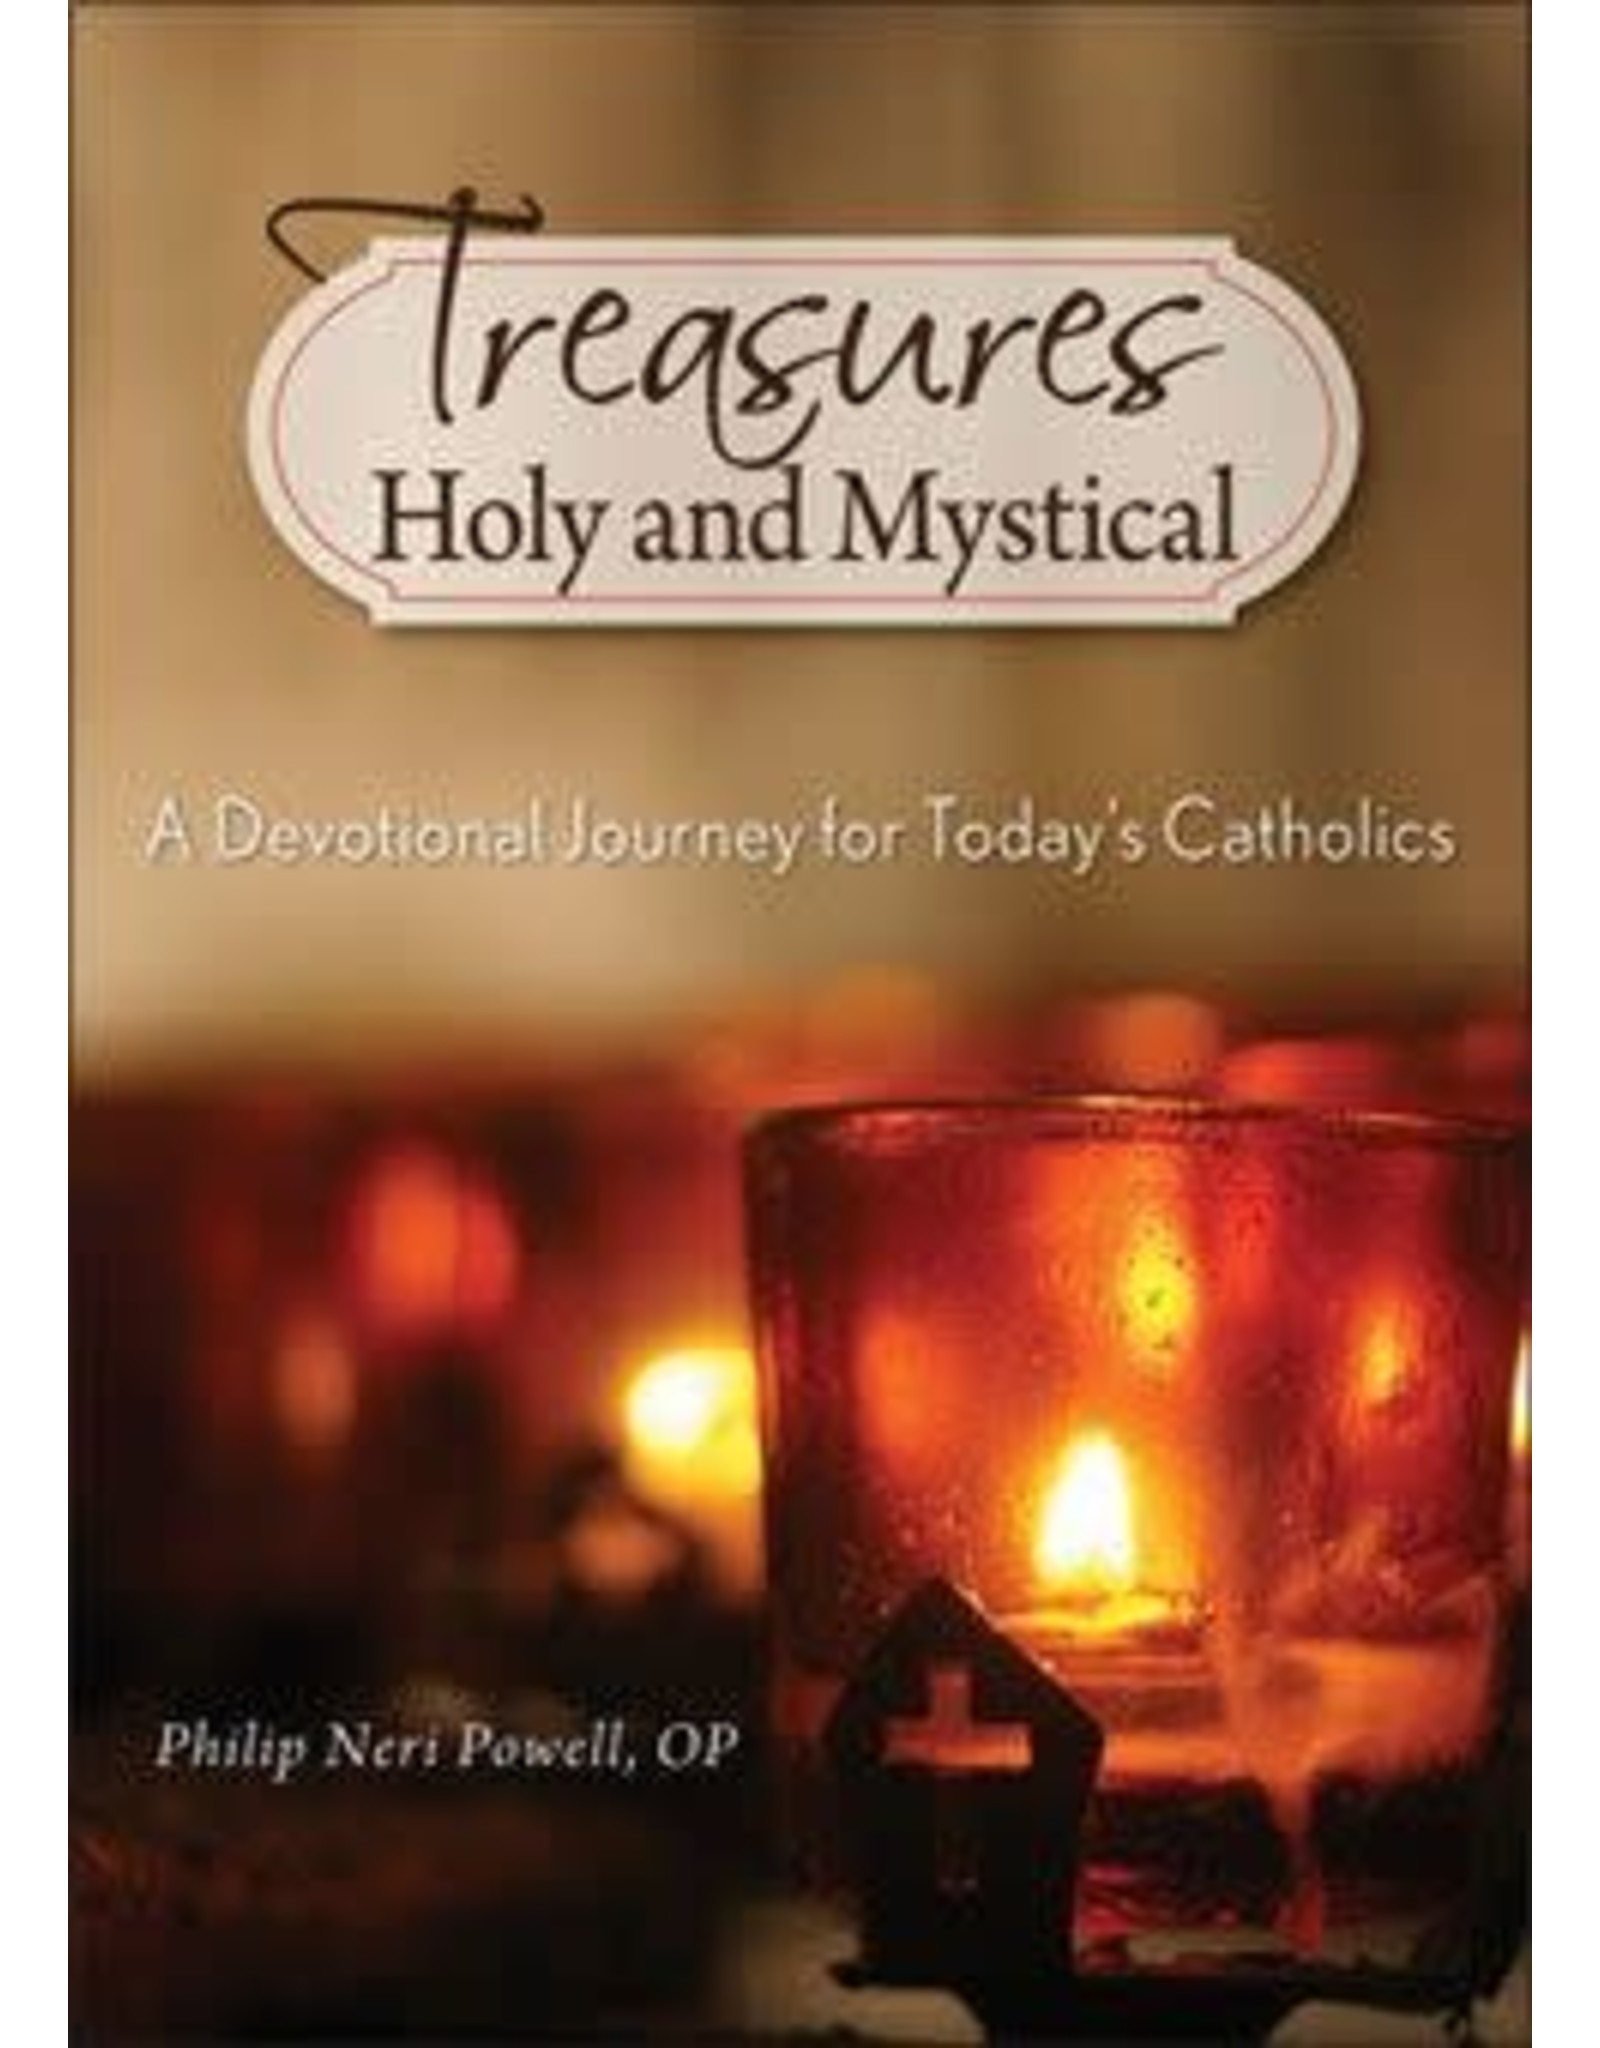 Treasures Holy & Mystical: A Devotional Journey for Today’s Catholics